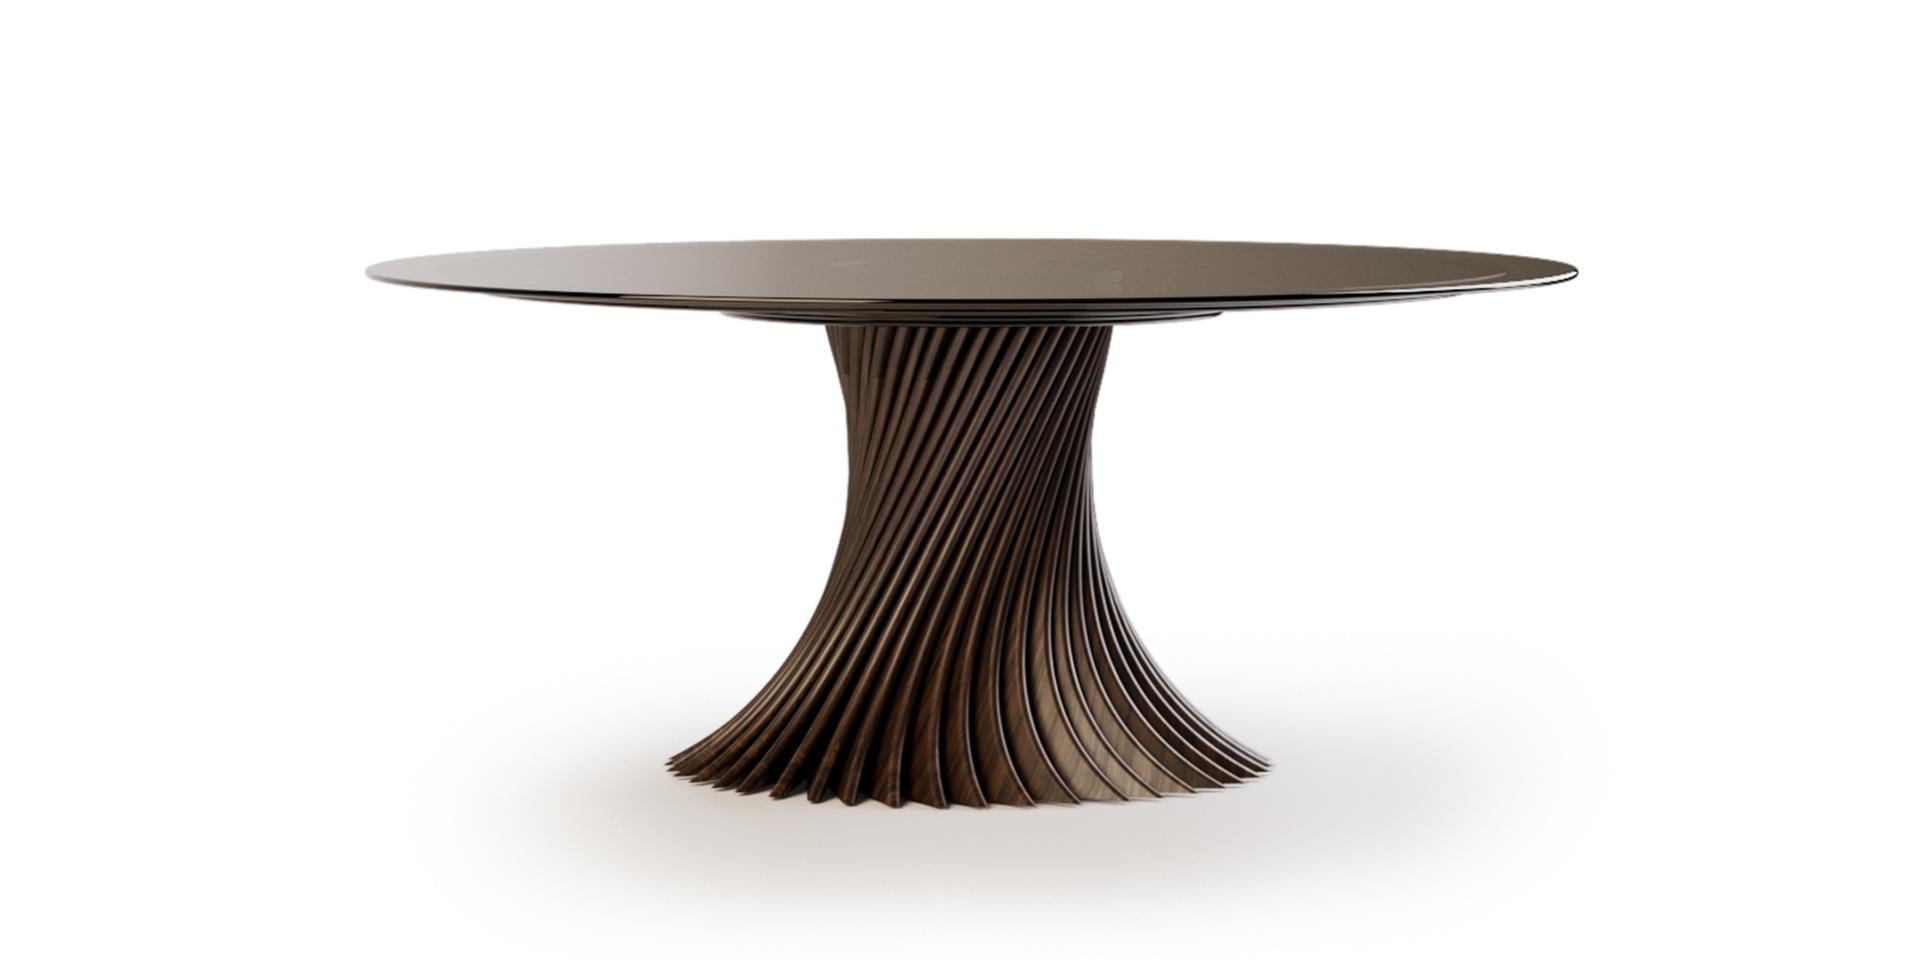 Naruto is an exclusive dining table that features remarkable construction details and materials. Its sublime lines are appropriate for modern decor and in any unique and sophisticated dining room environment.